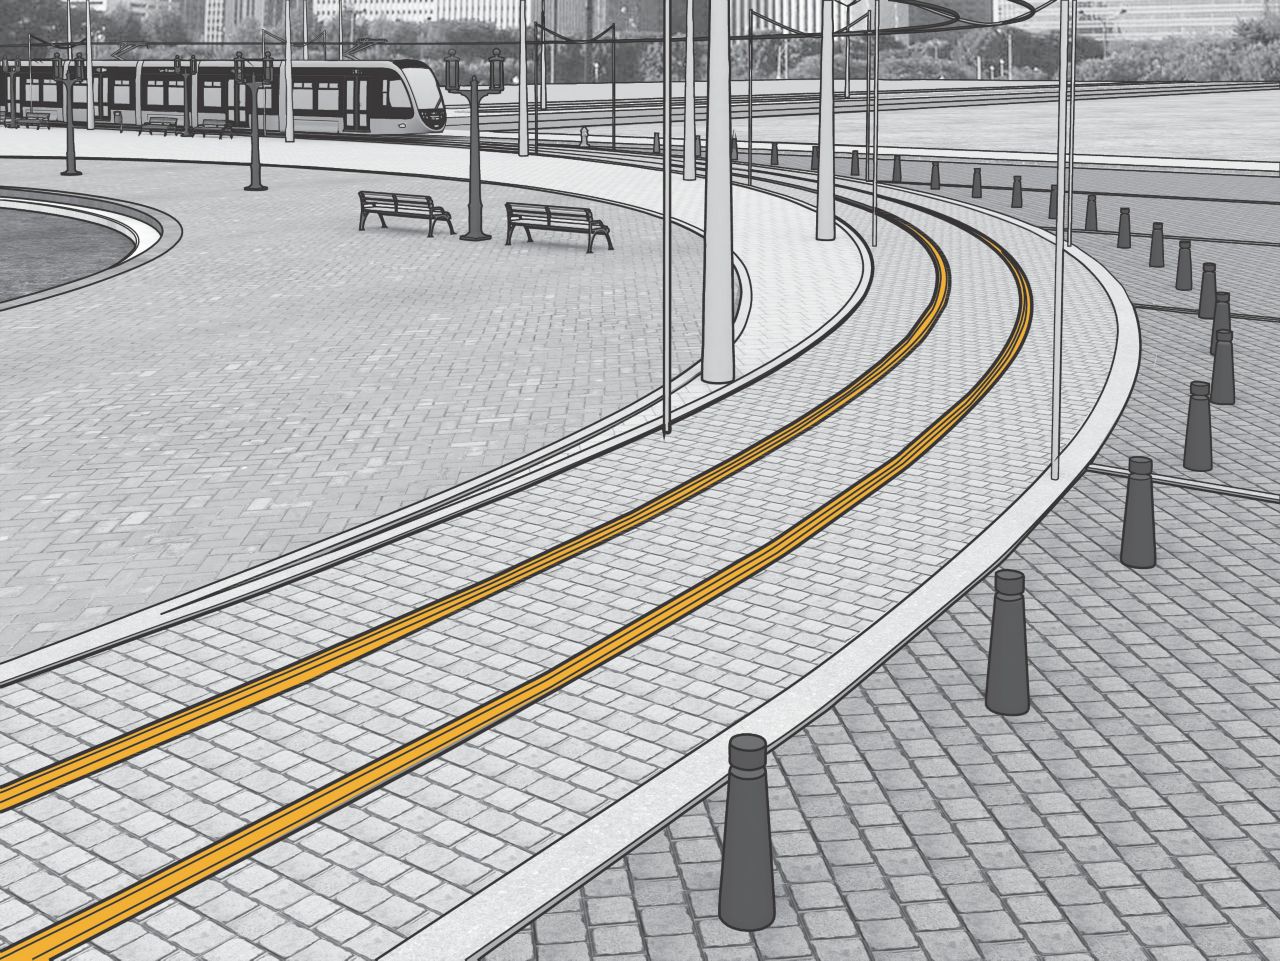 Illustration of tram track rail fixing at landscaped area